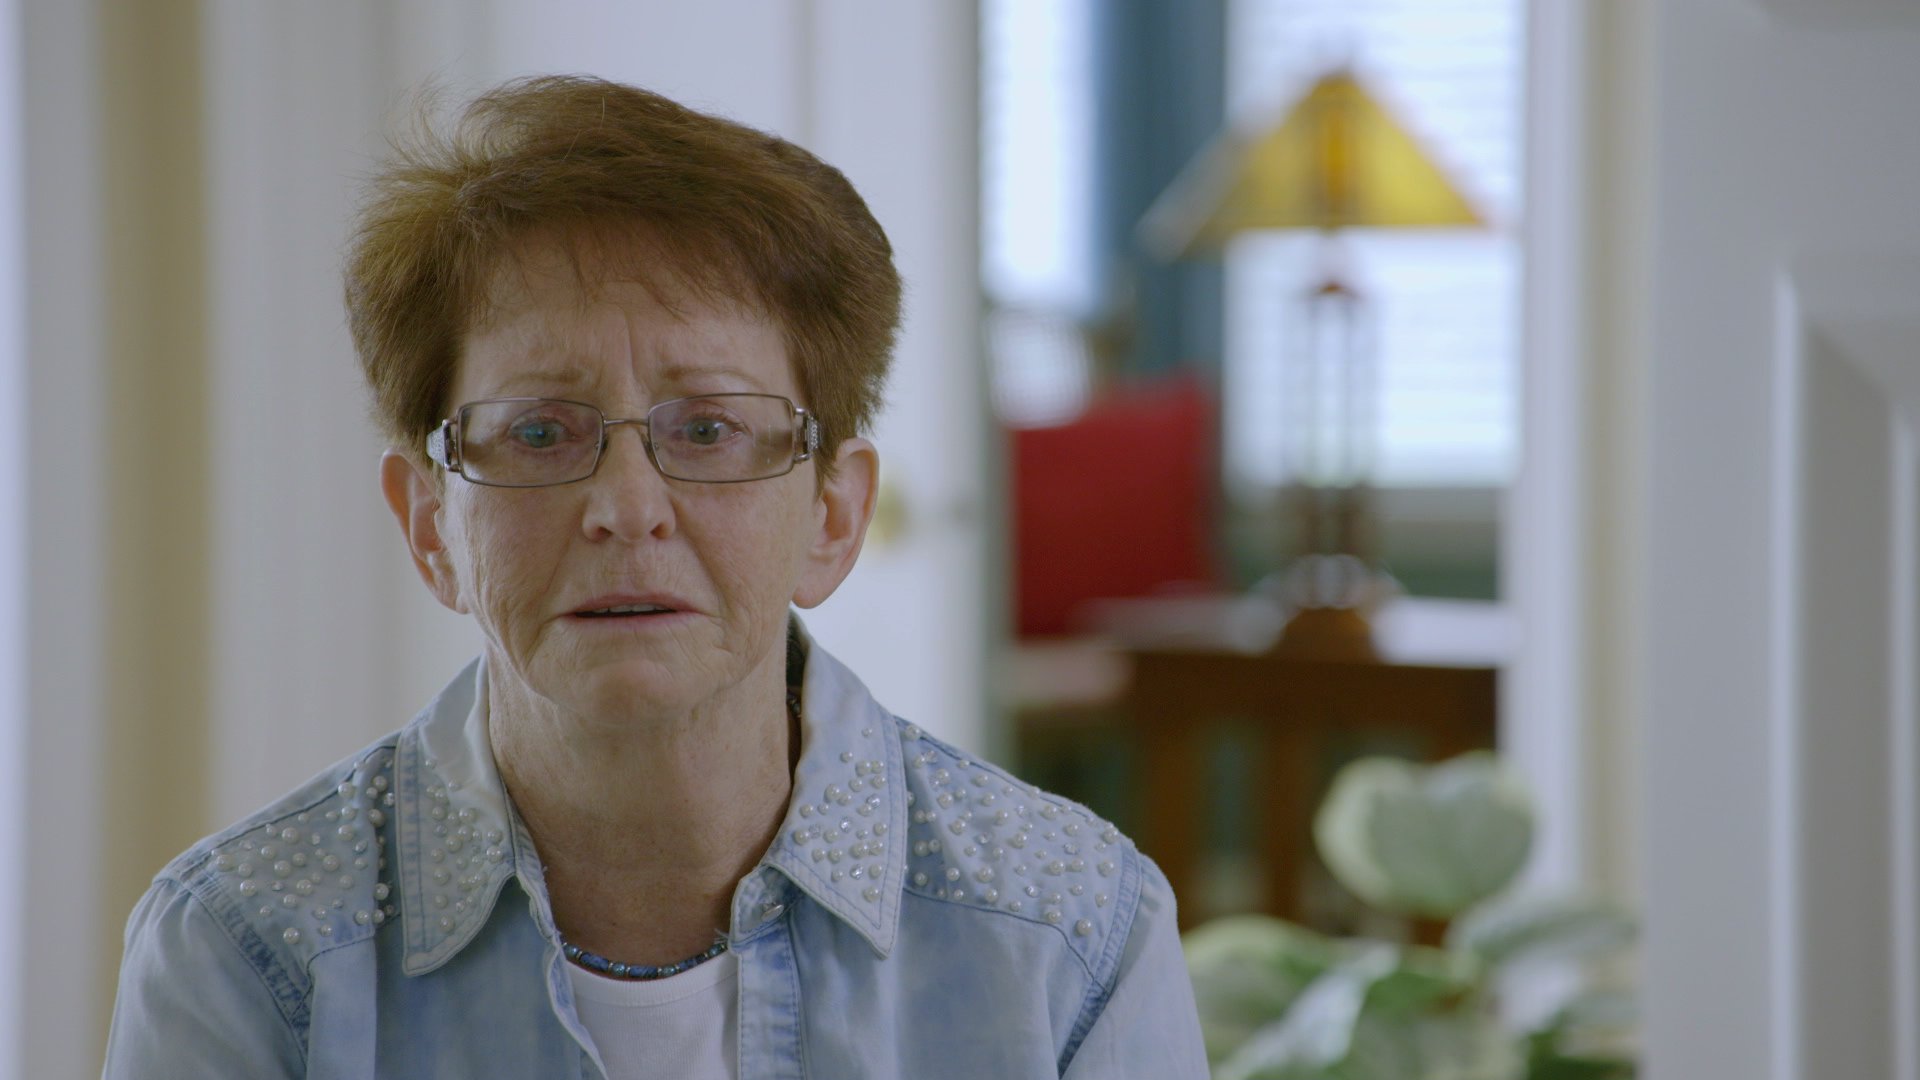 Smiley Face Killers Bonus: Brian Welzien's Mother Speaks About Coping with Her Son's Death (Season 1, Episode 4)